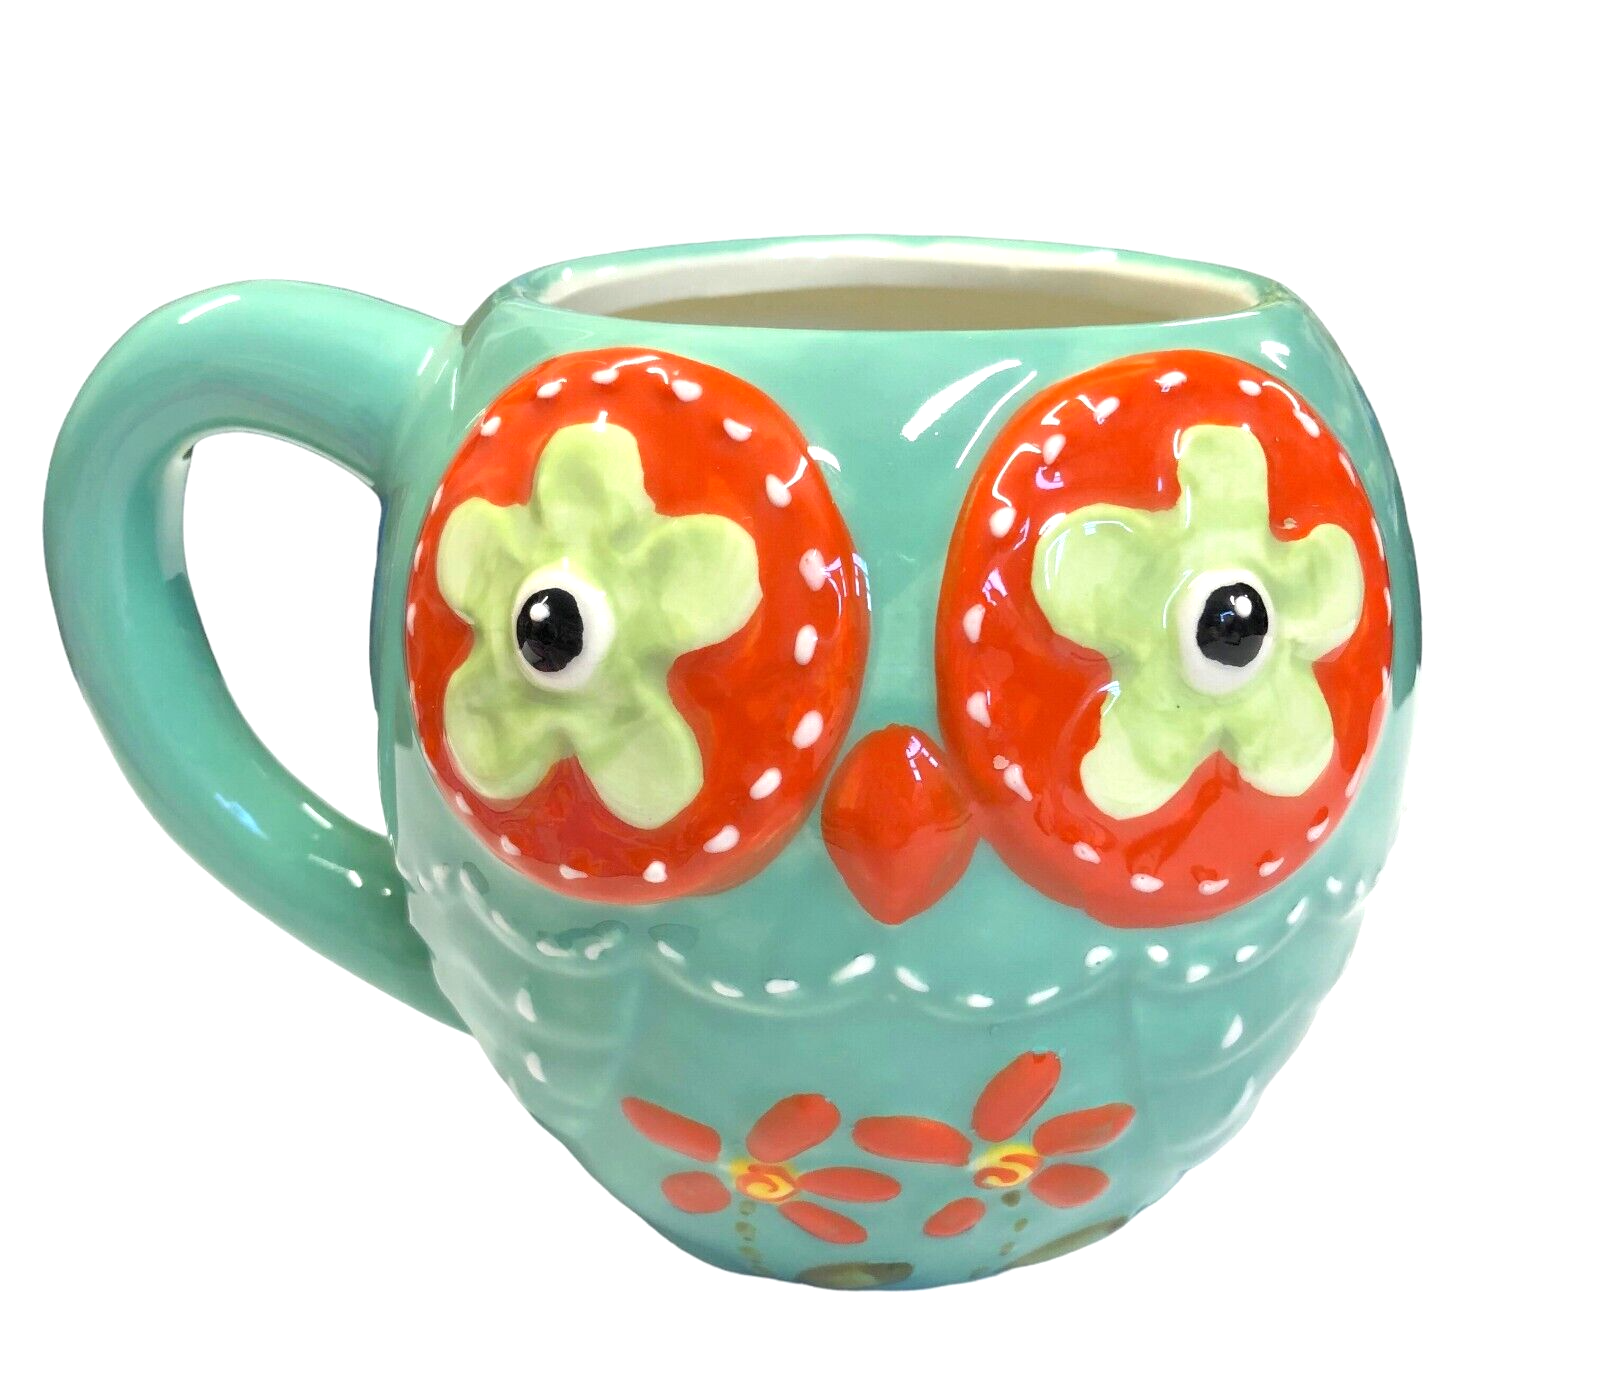 Primary image for Cracker Barrel Owl Mug Green Teal Hand Painted 4 inch Tall Great Gift Fillers